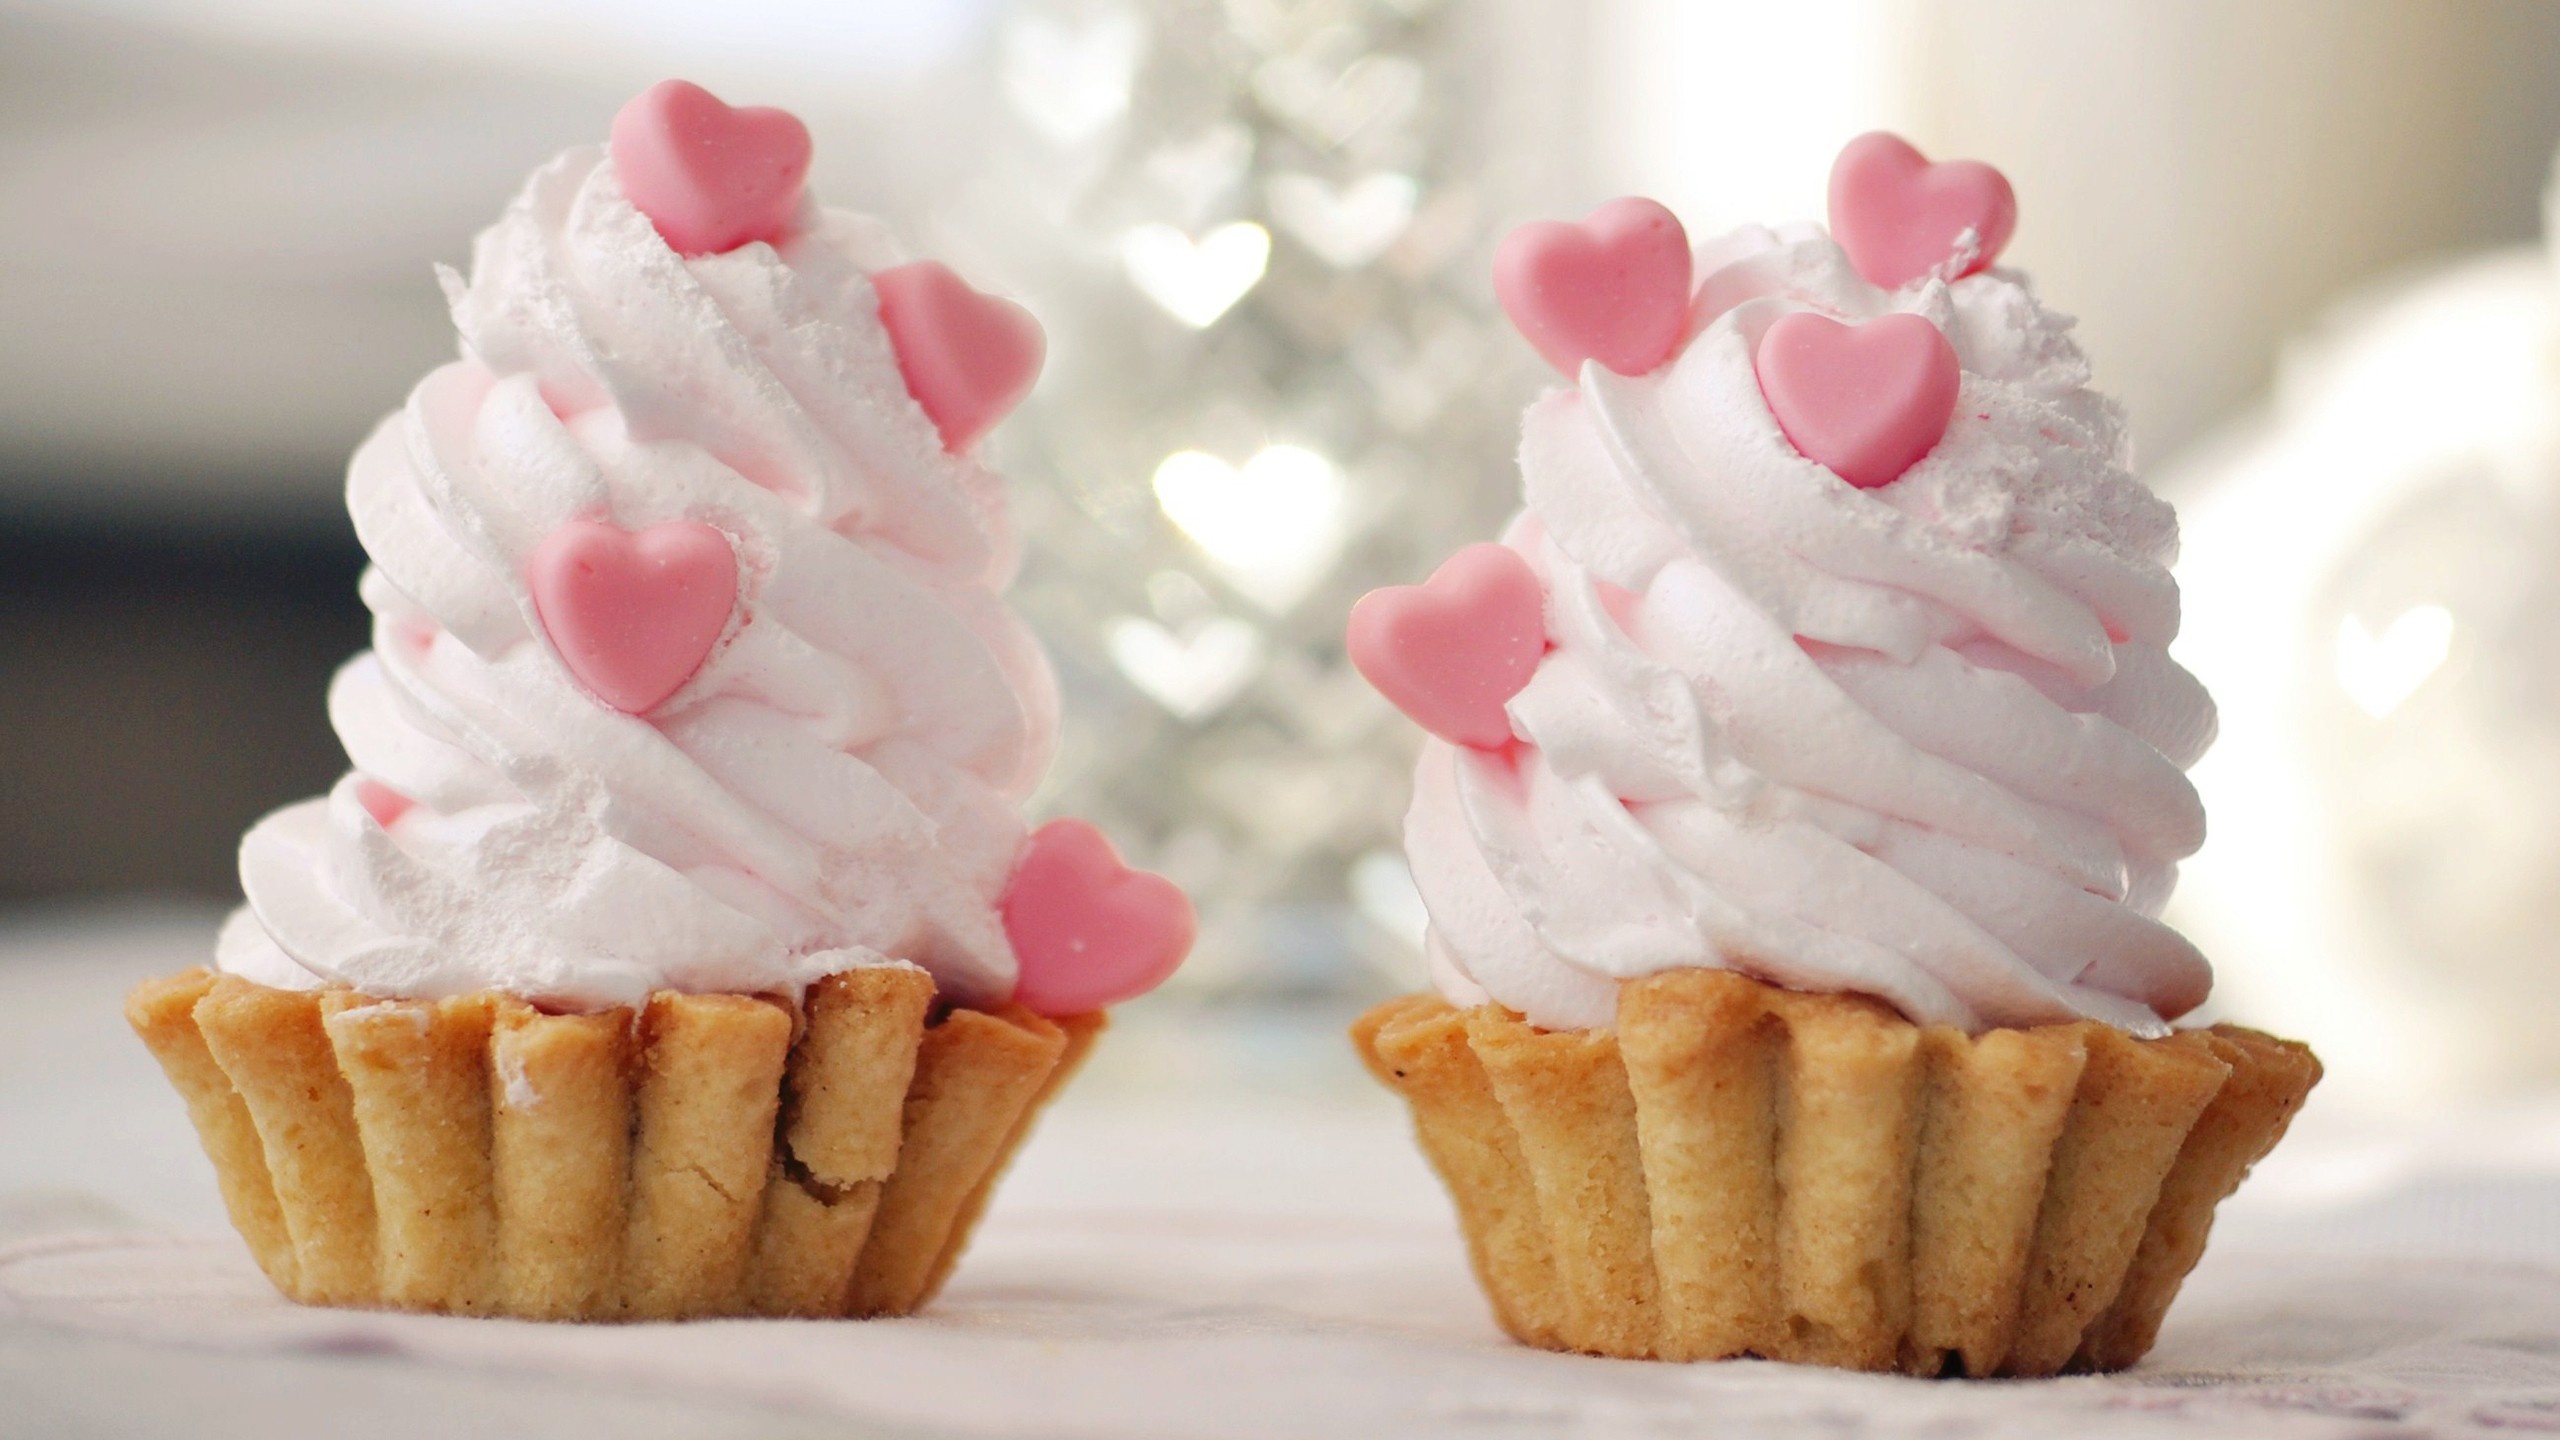 Download Cute Cupcakes Wallpaper 650 2560x1440 px High Resolution ...